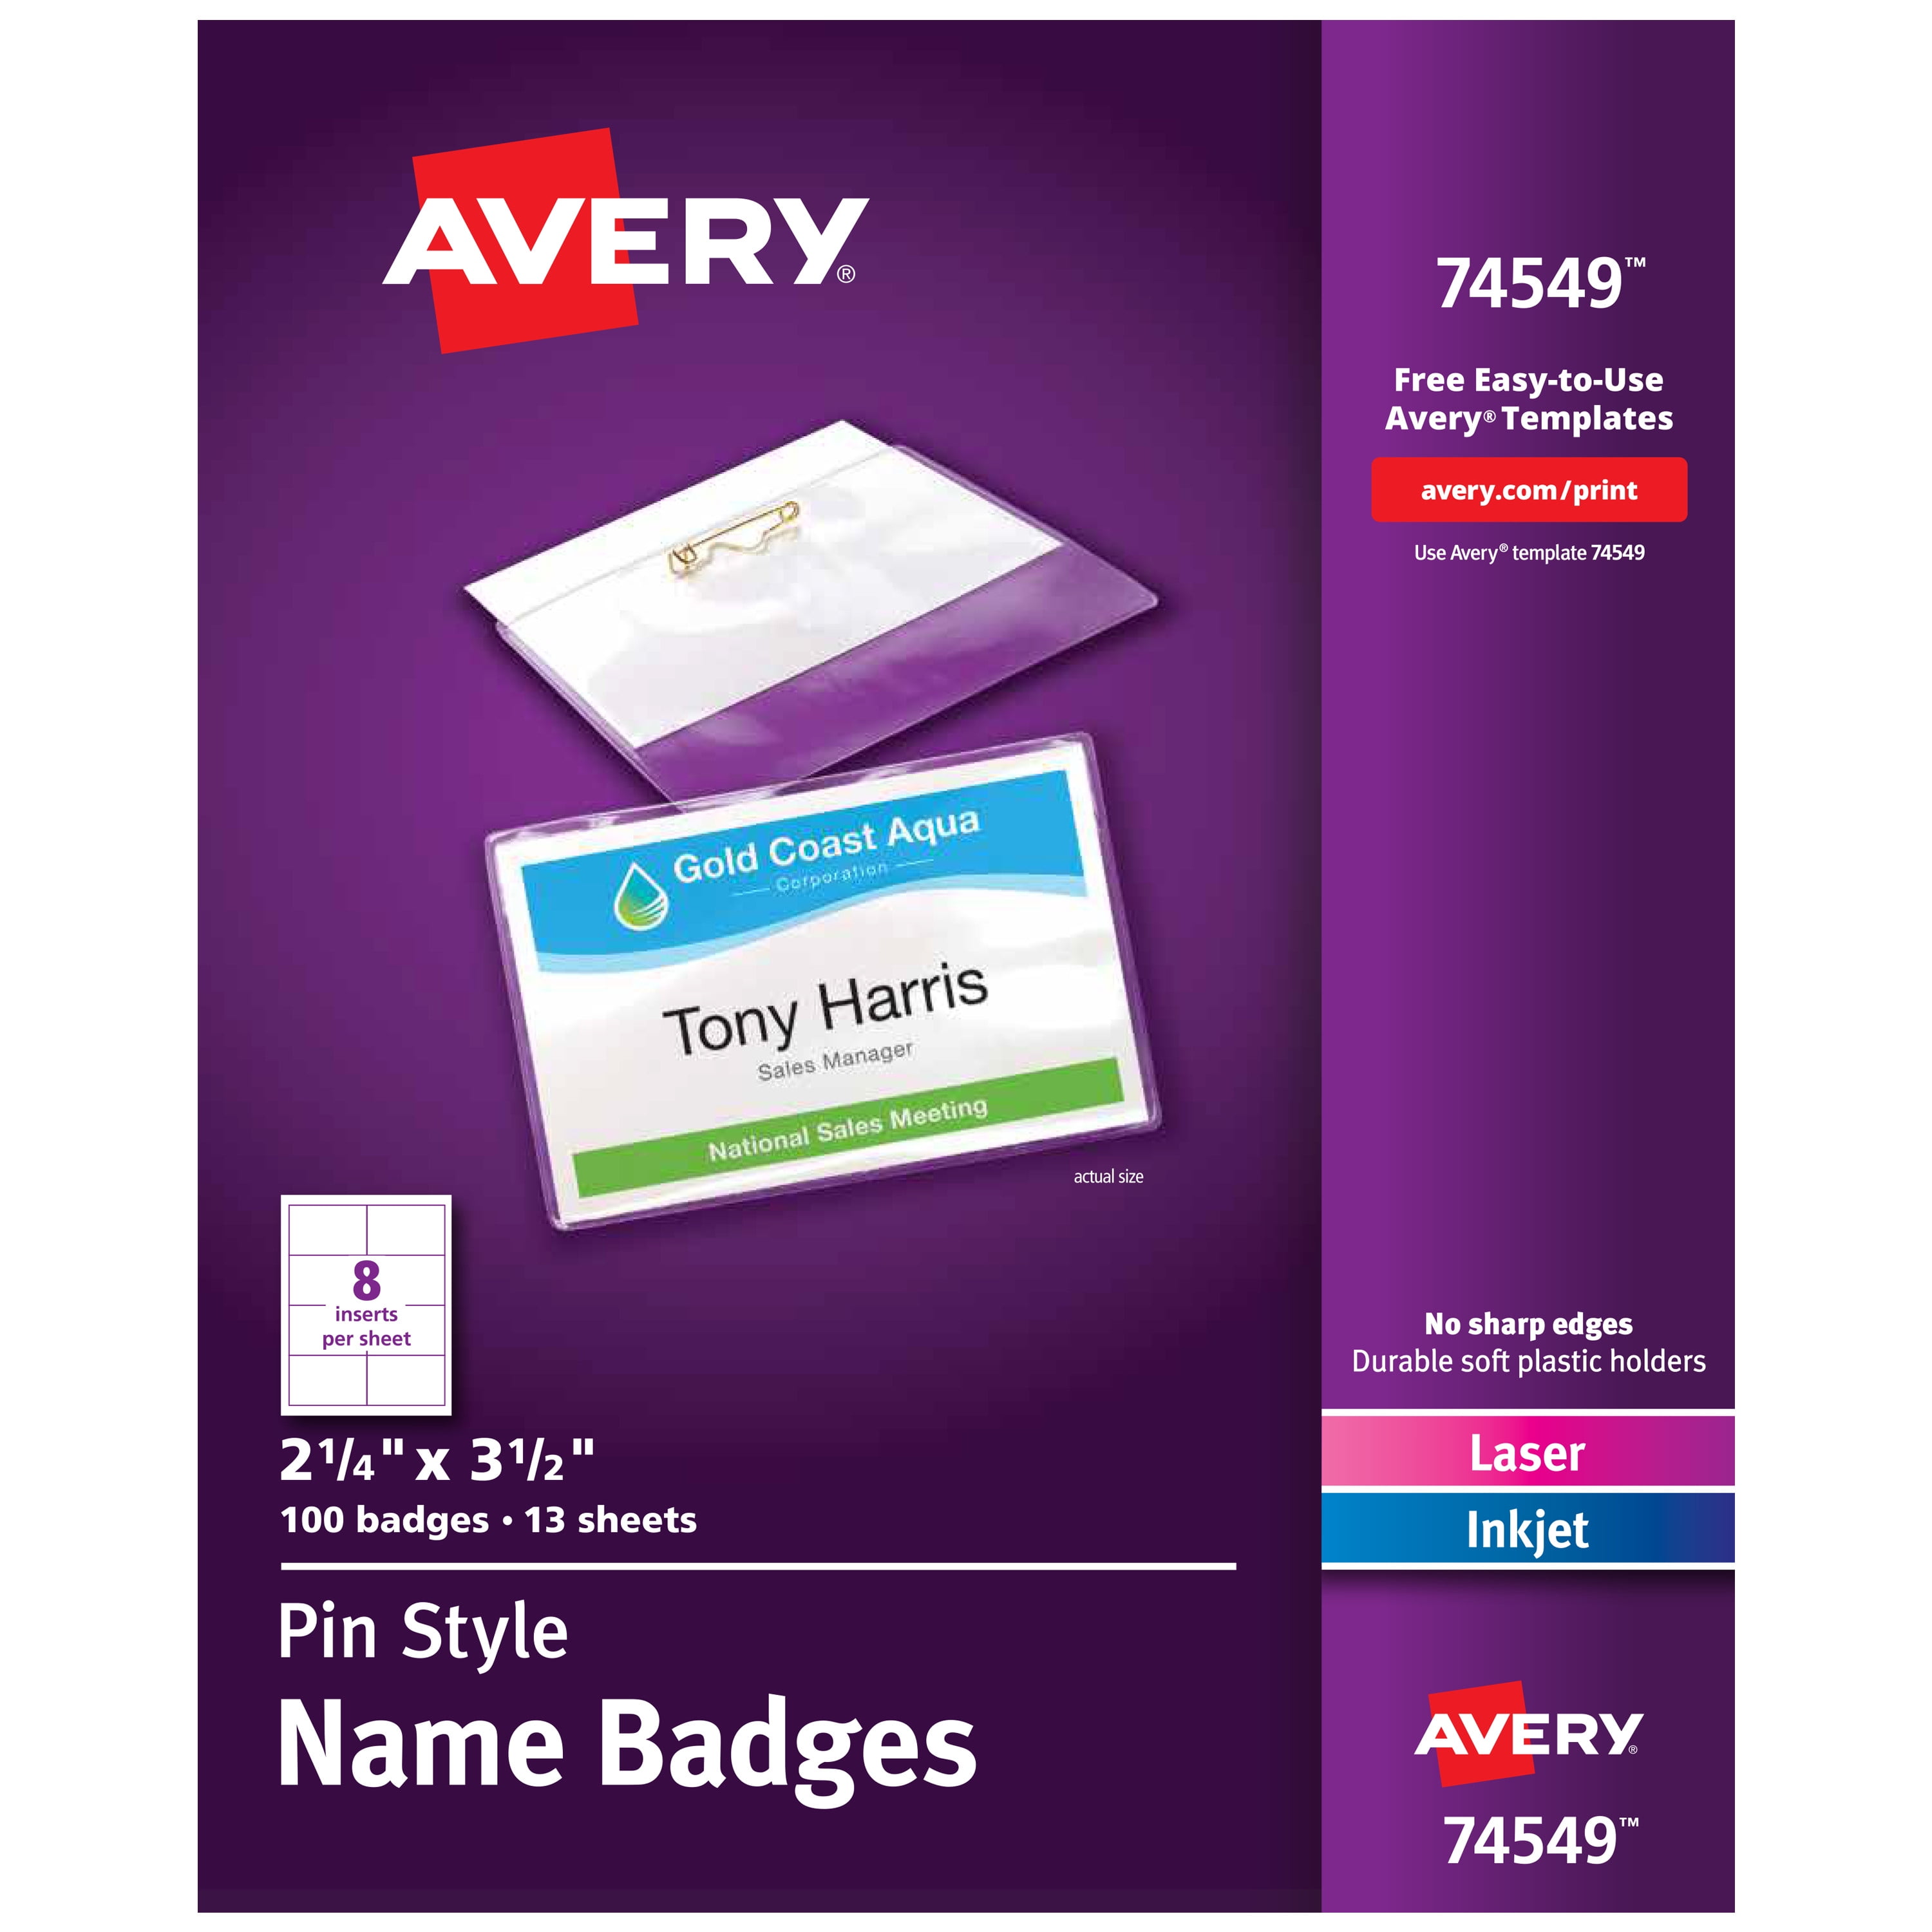 Avery Pin Style Name Badges, 21/4" x 31/2", 100 Badges (74549